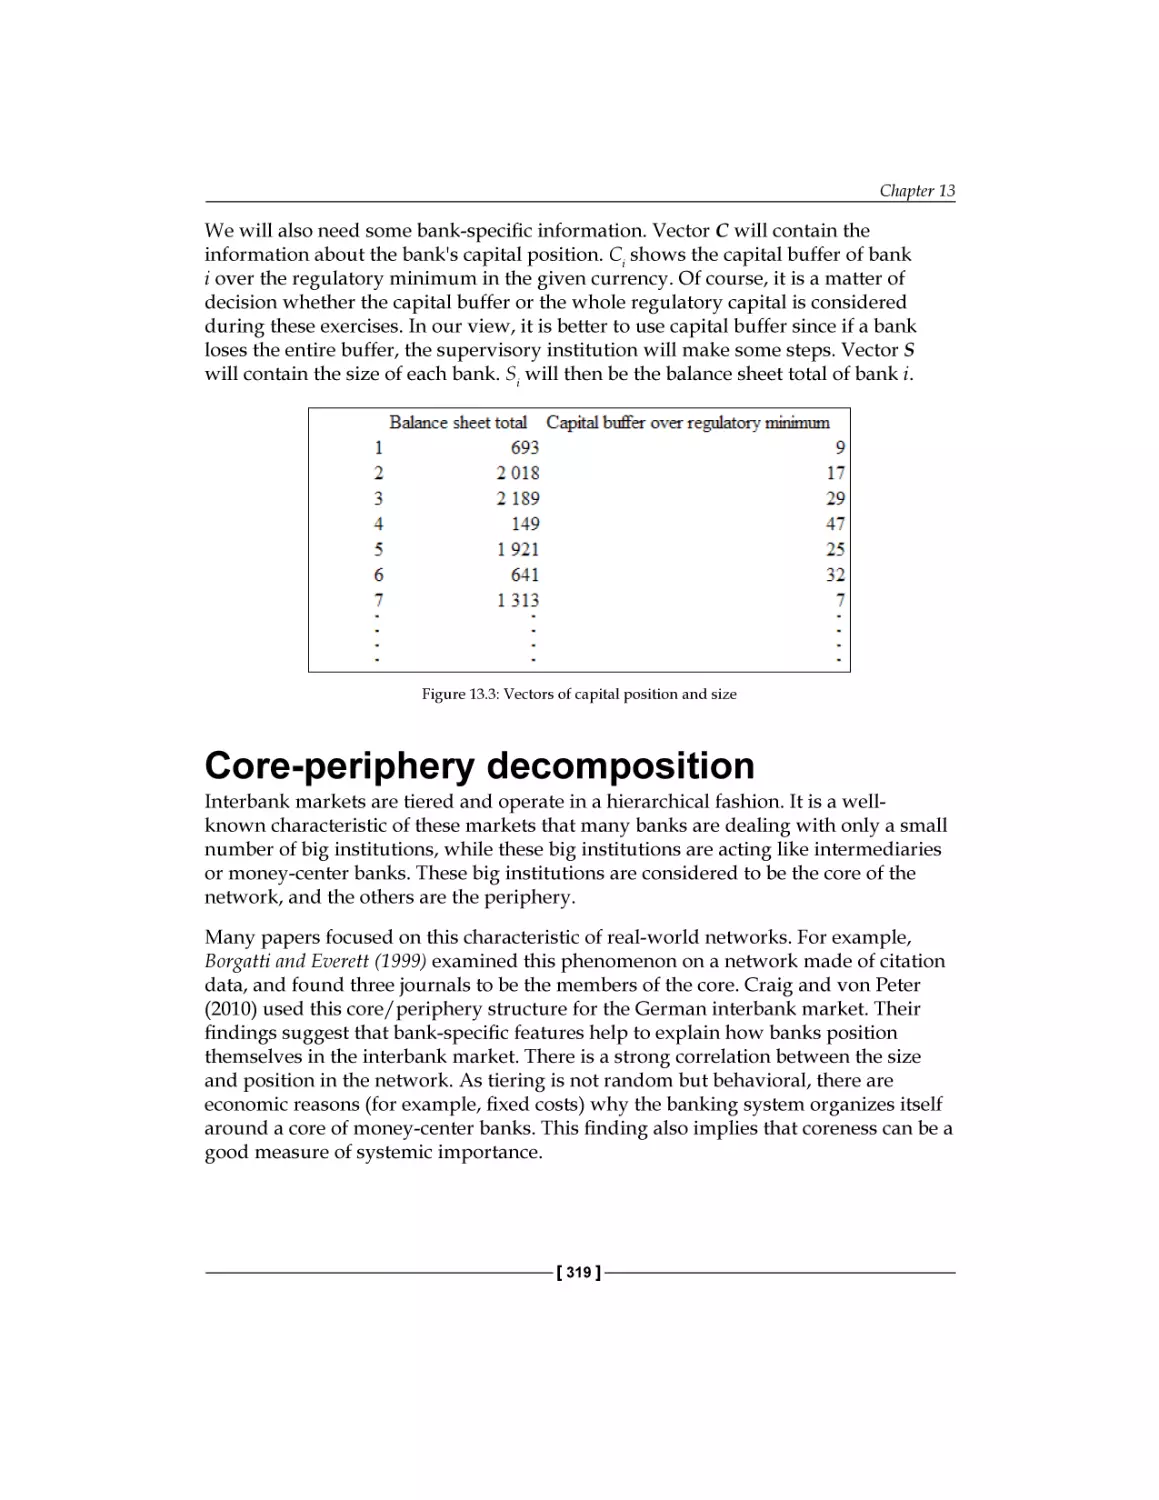 Core-periphery decomposition